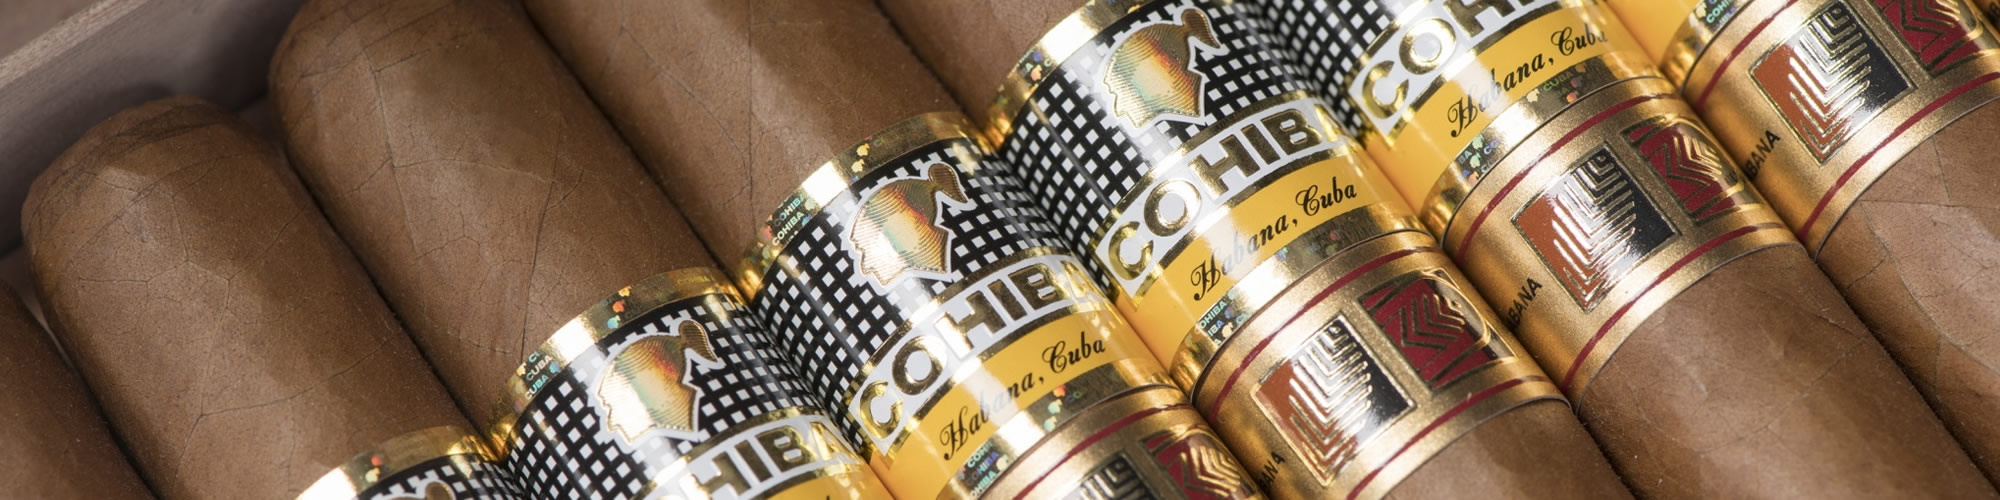 LCDH Exclusive Cigars